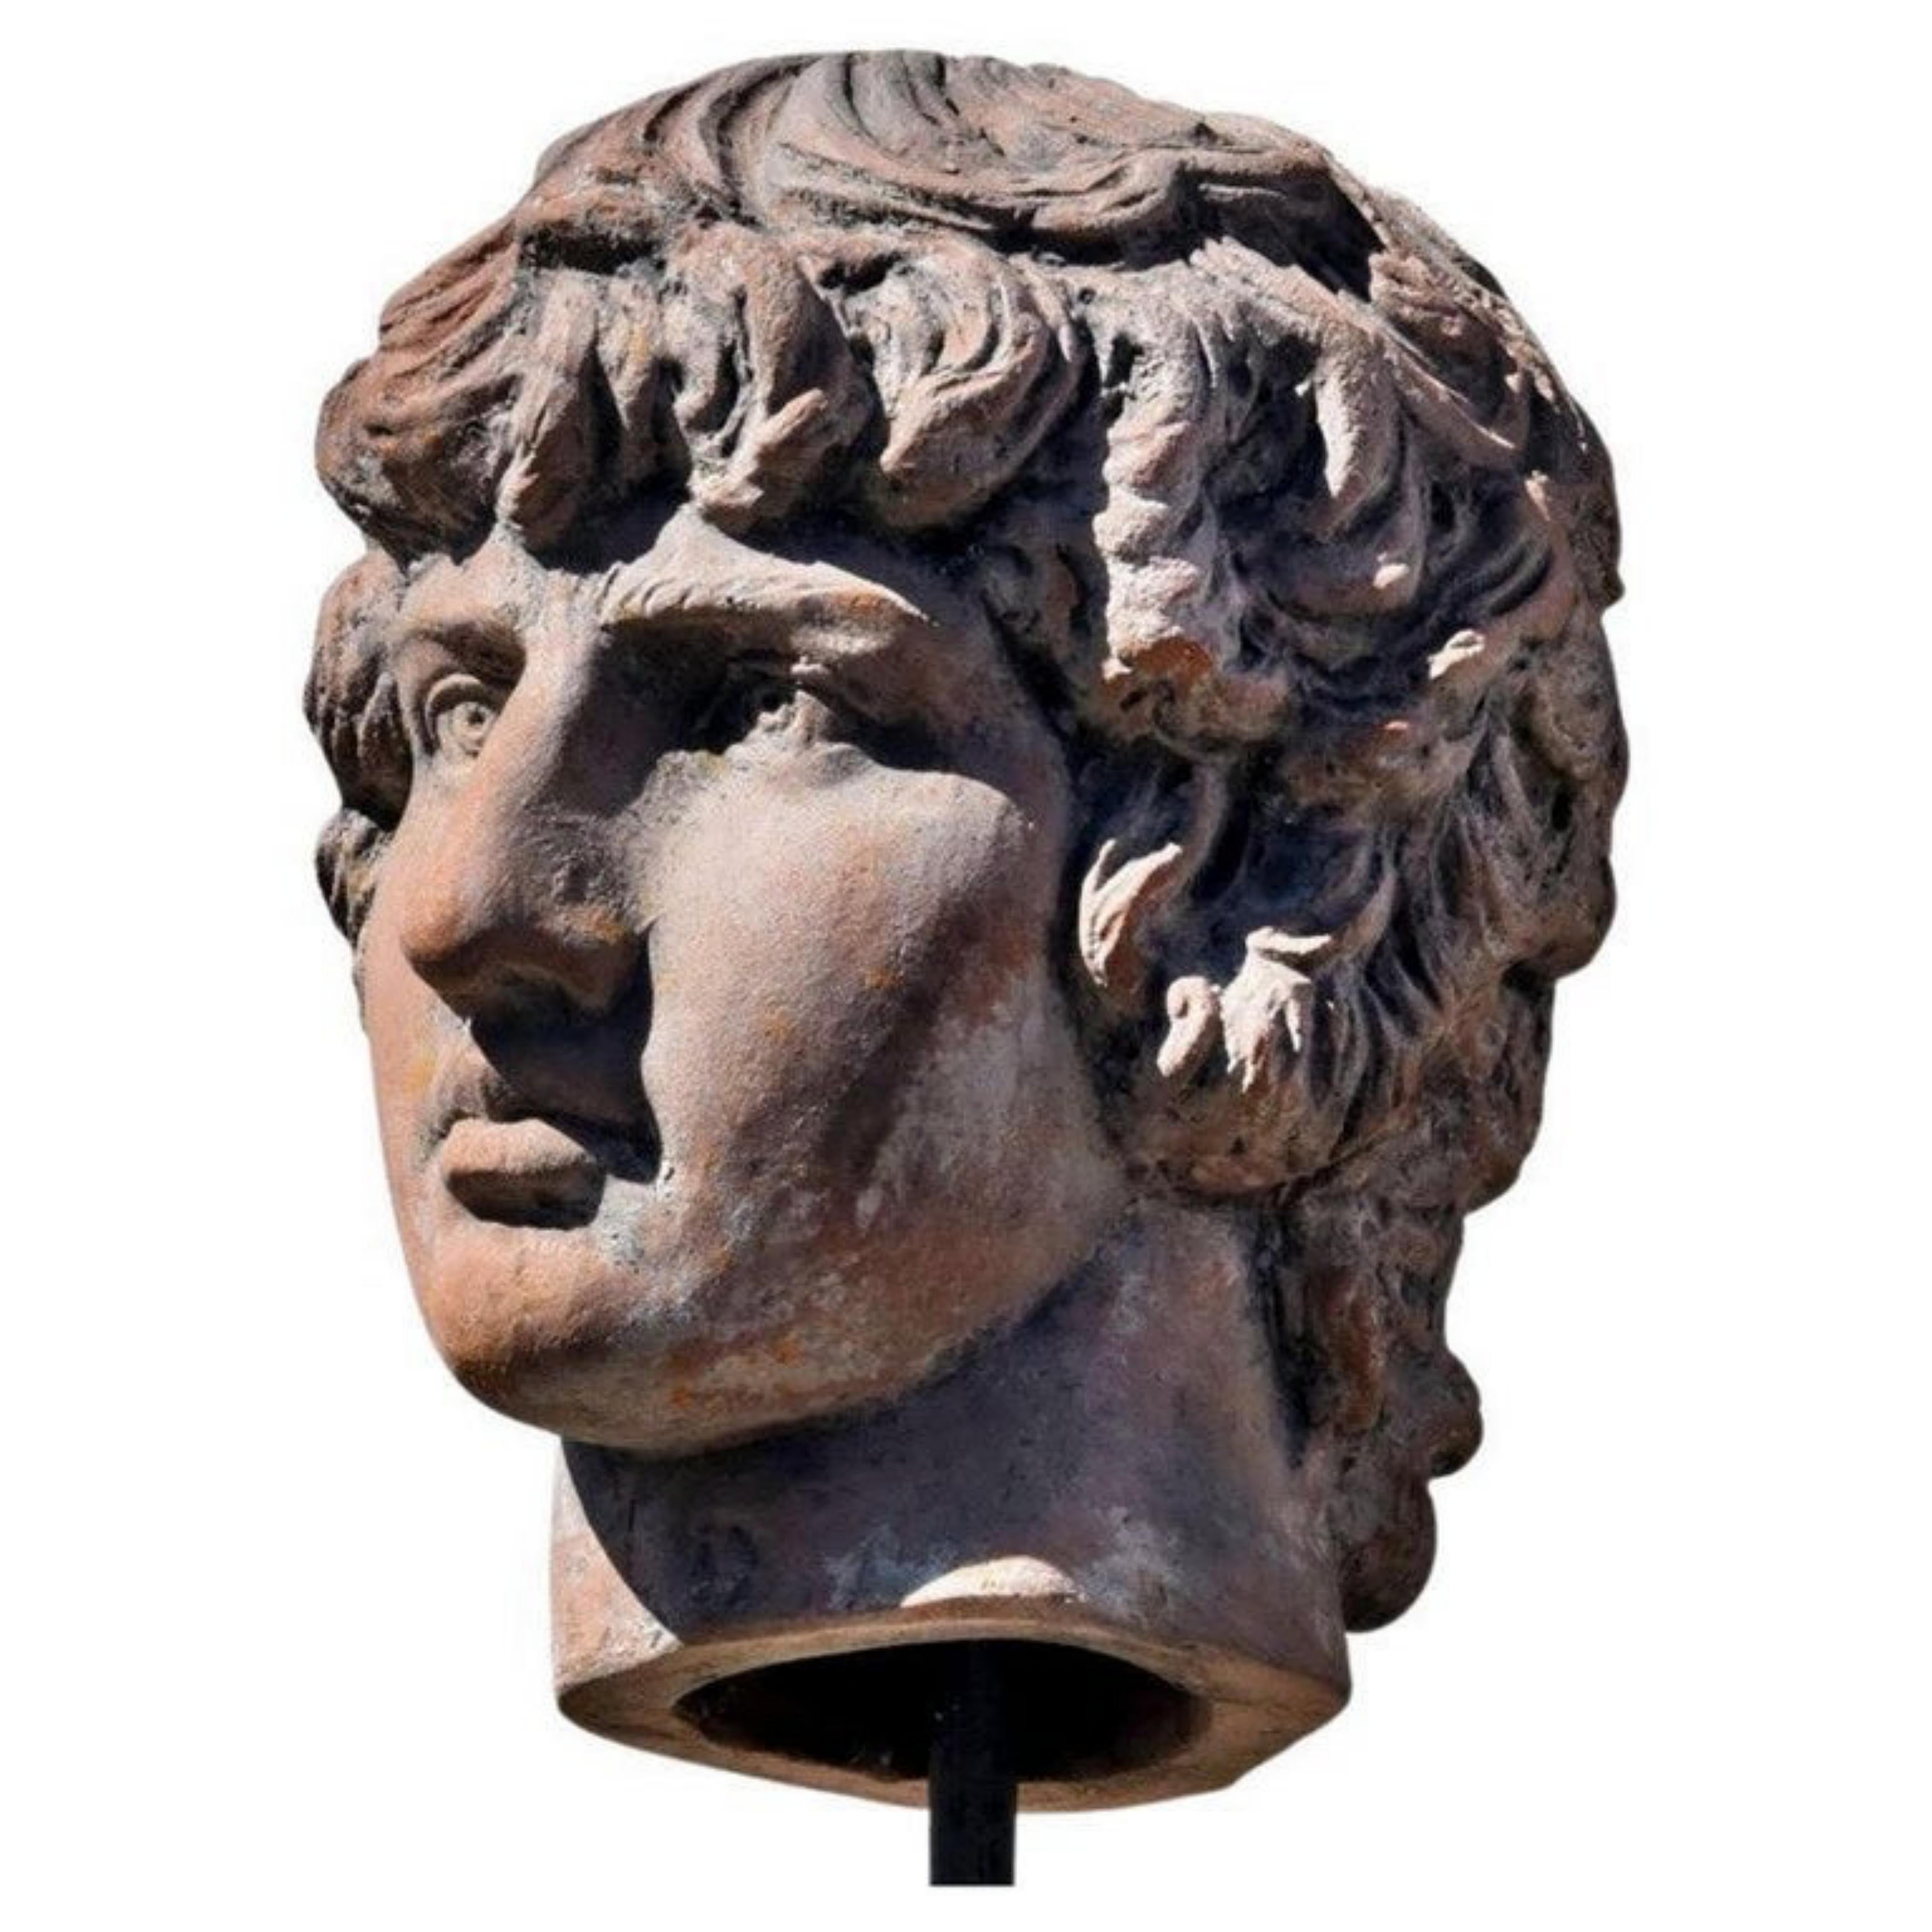 Antinoo with marble base.

Terracotta head with marble base.
Italy
Antinous (Bitnia 130 - Alexandria of Egypt 150 AD).
Publio's favorite Elio Adriano.

Mesaures: height 33 cm.
width 30 cm.
depth 28 cm.